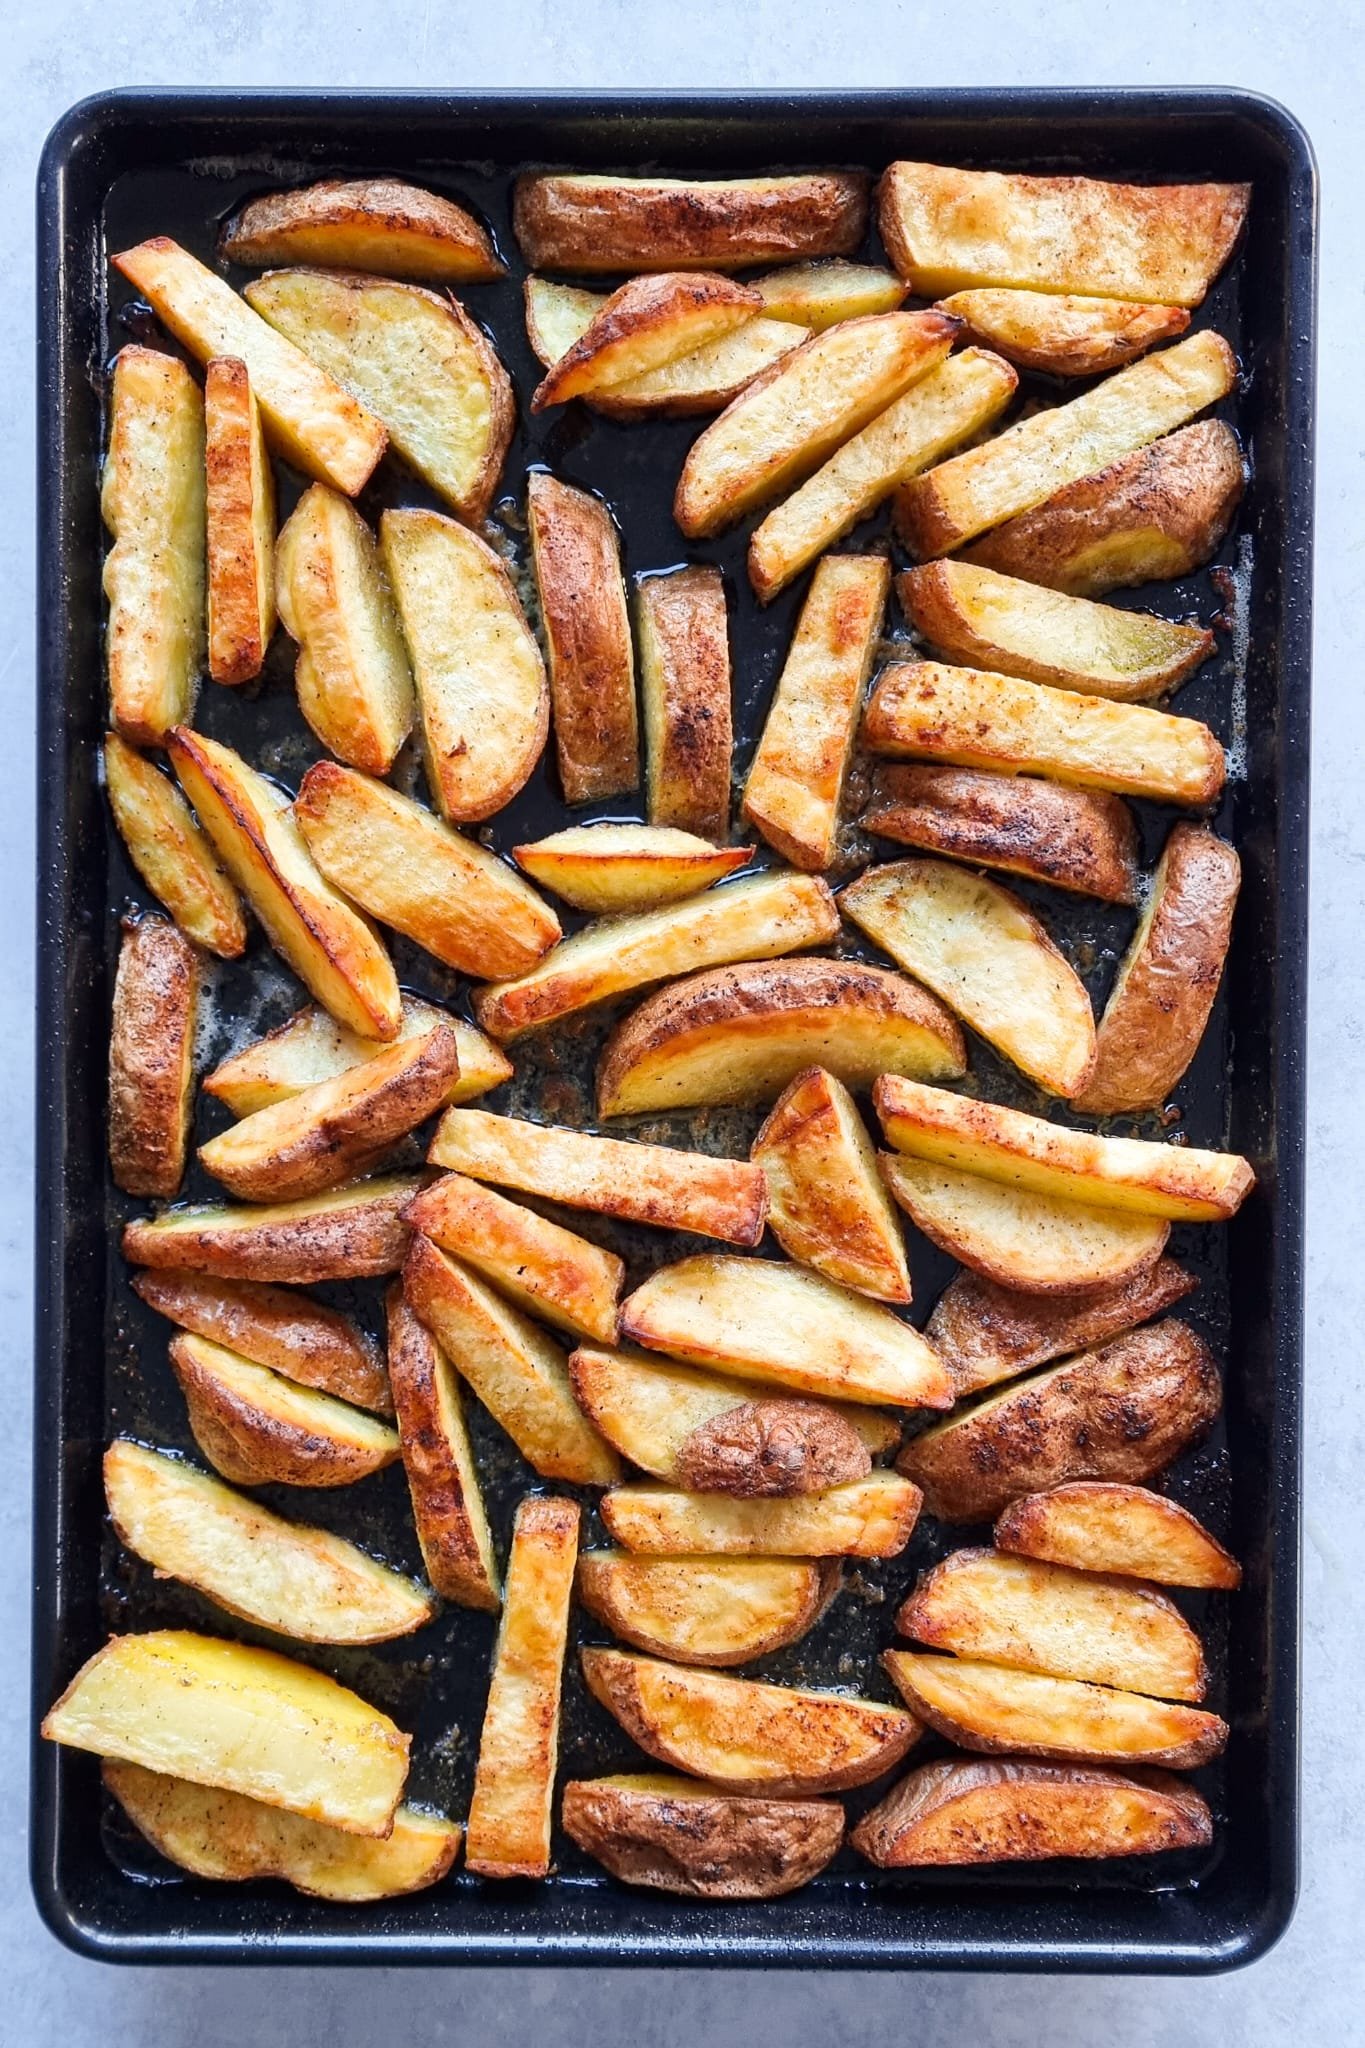 Golden and super crunchy oven roasted potatoes